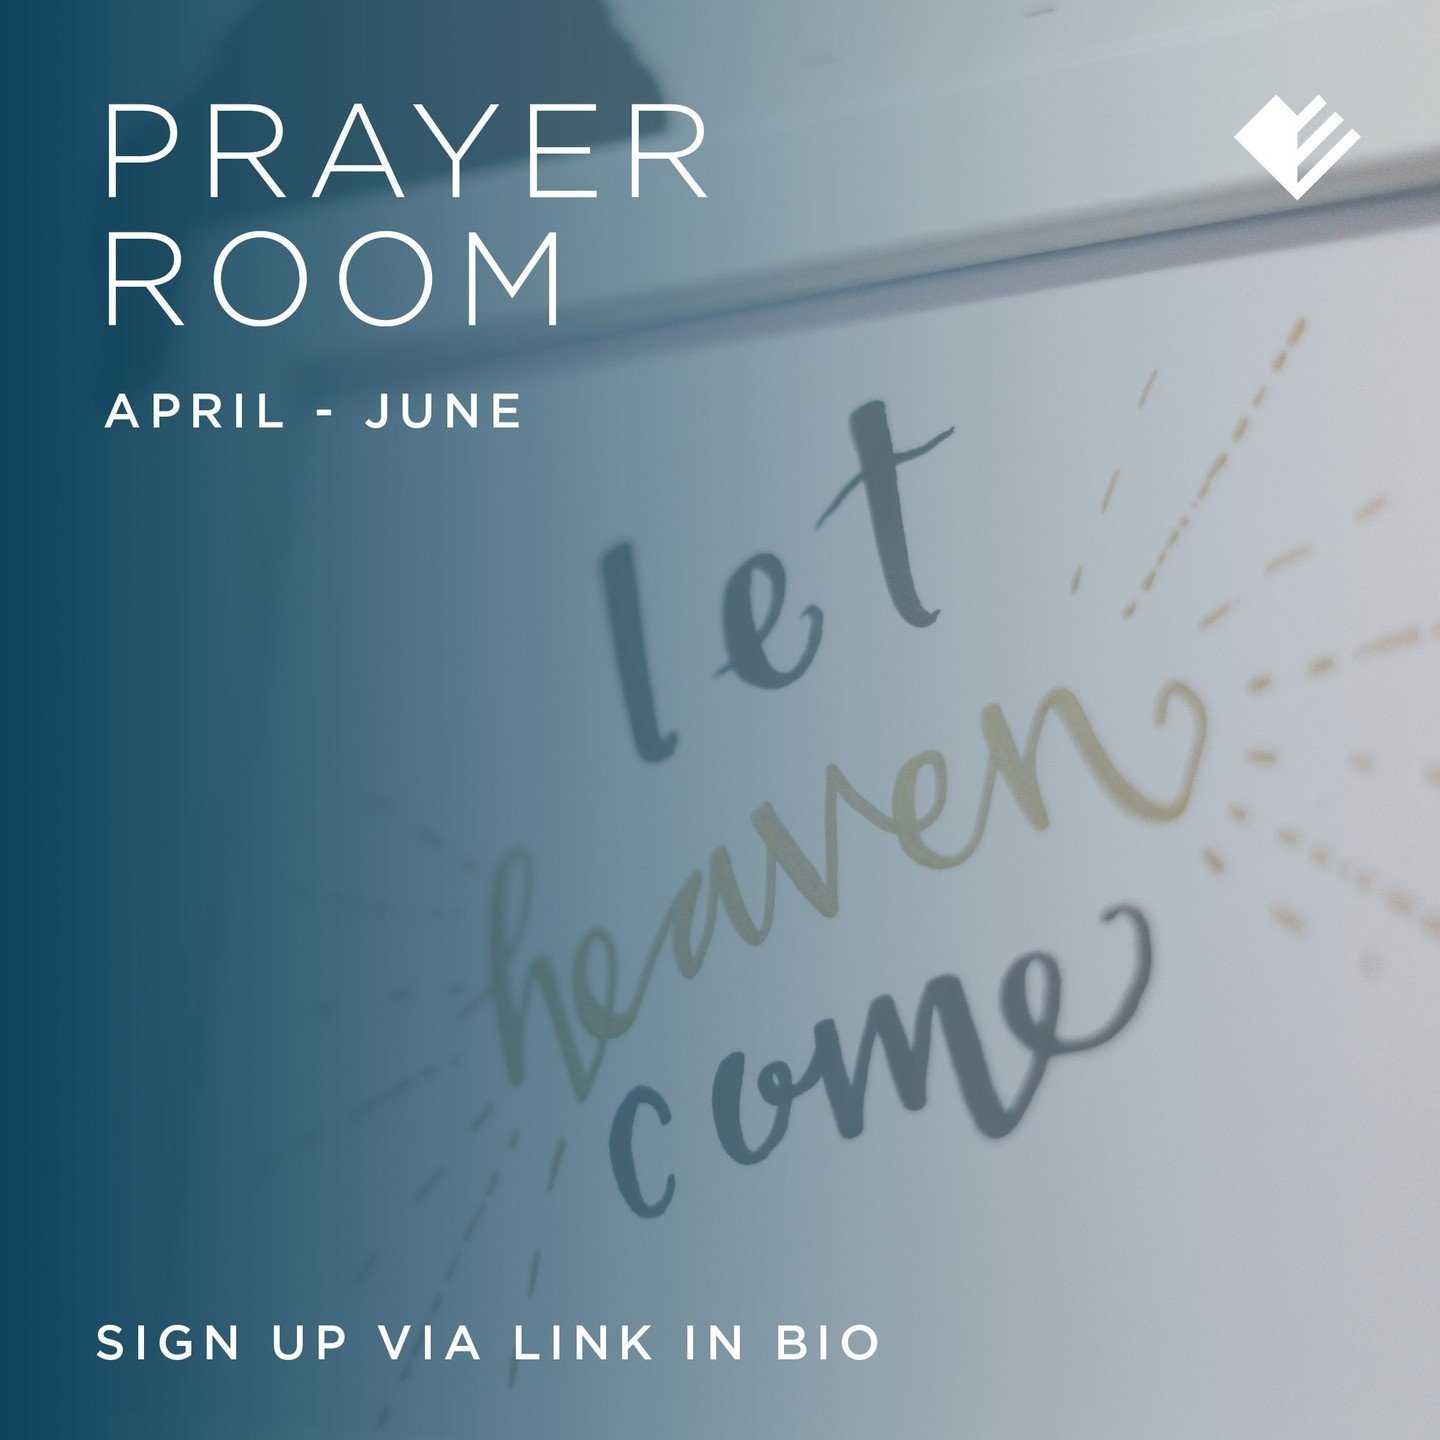 Please use the link in our bio to book a slot in the prayer room between now and June.